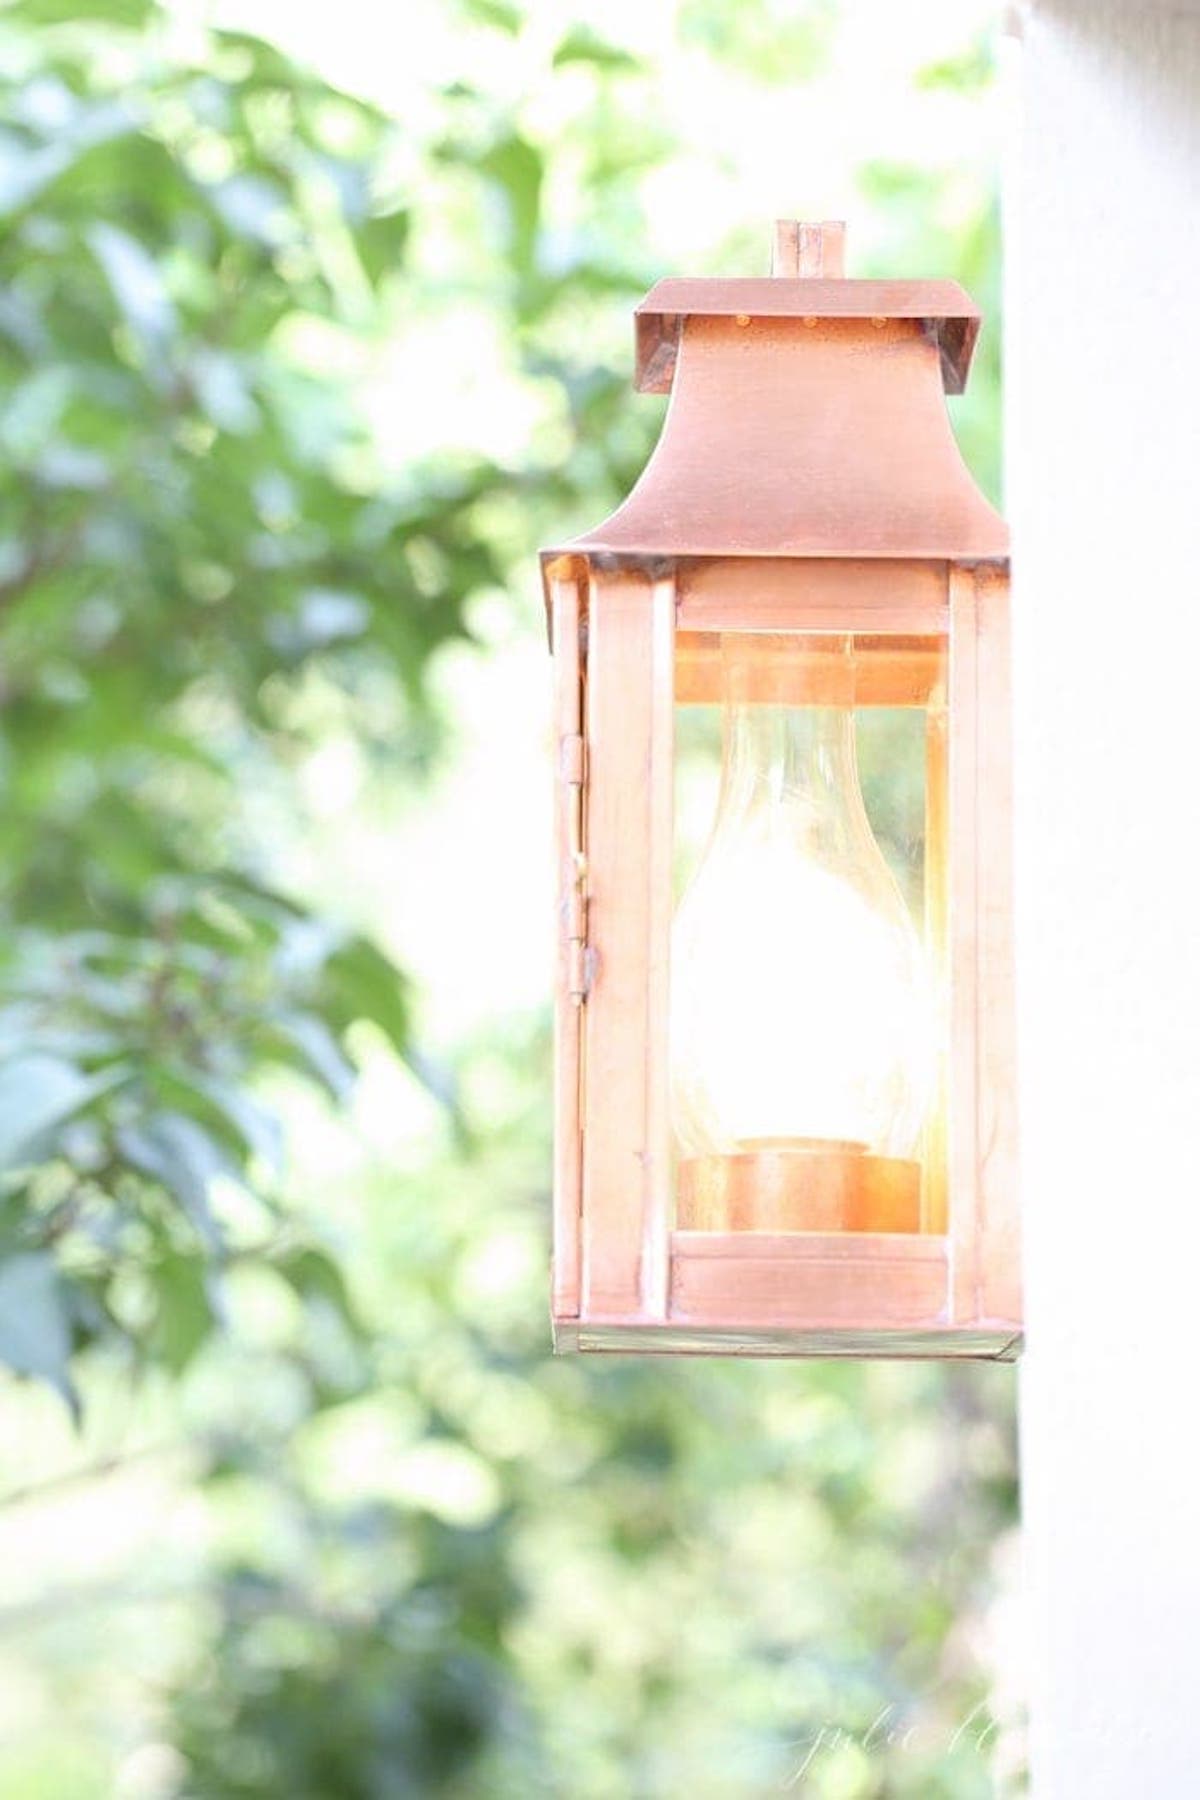 A copper lantern for outdoor lighting, hanging on the side of a house.